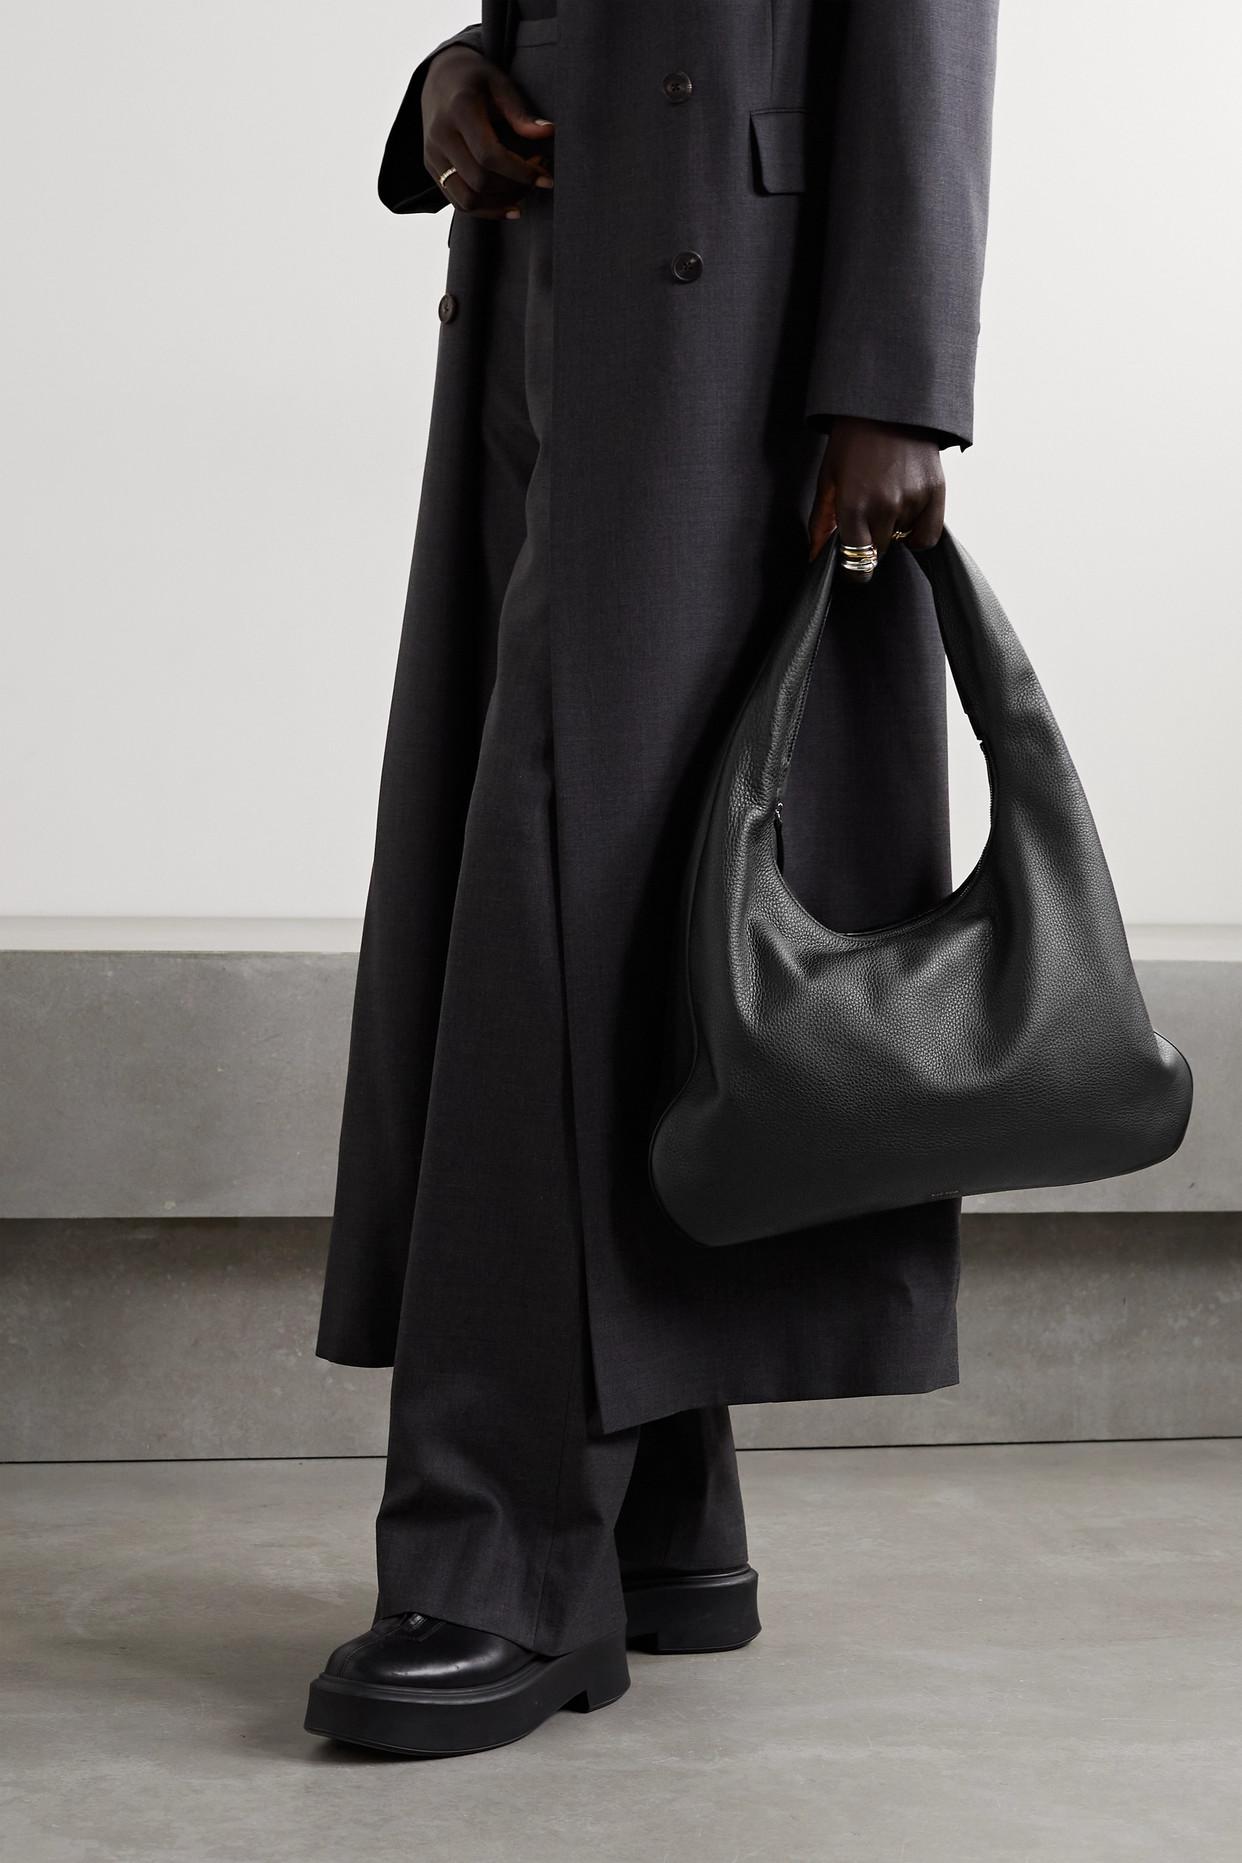 The Row Medium Leather Everyday Shoulder Bag in Black